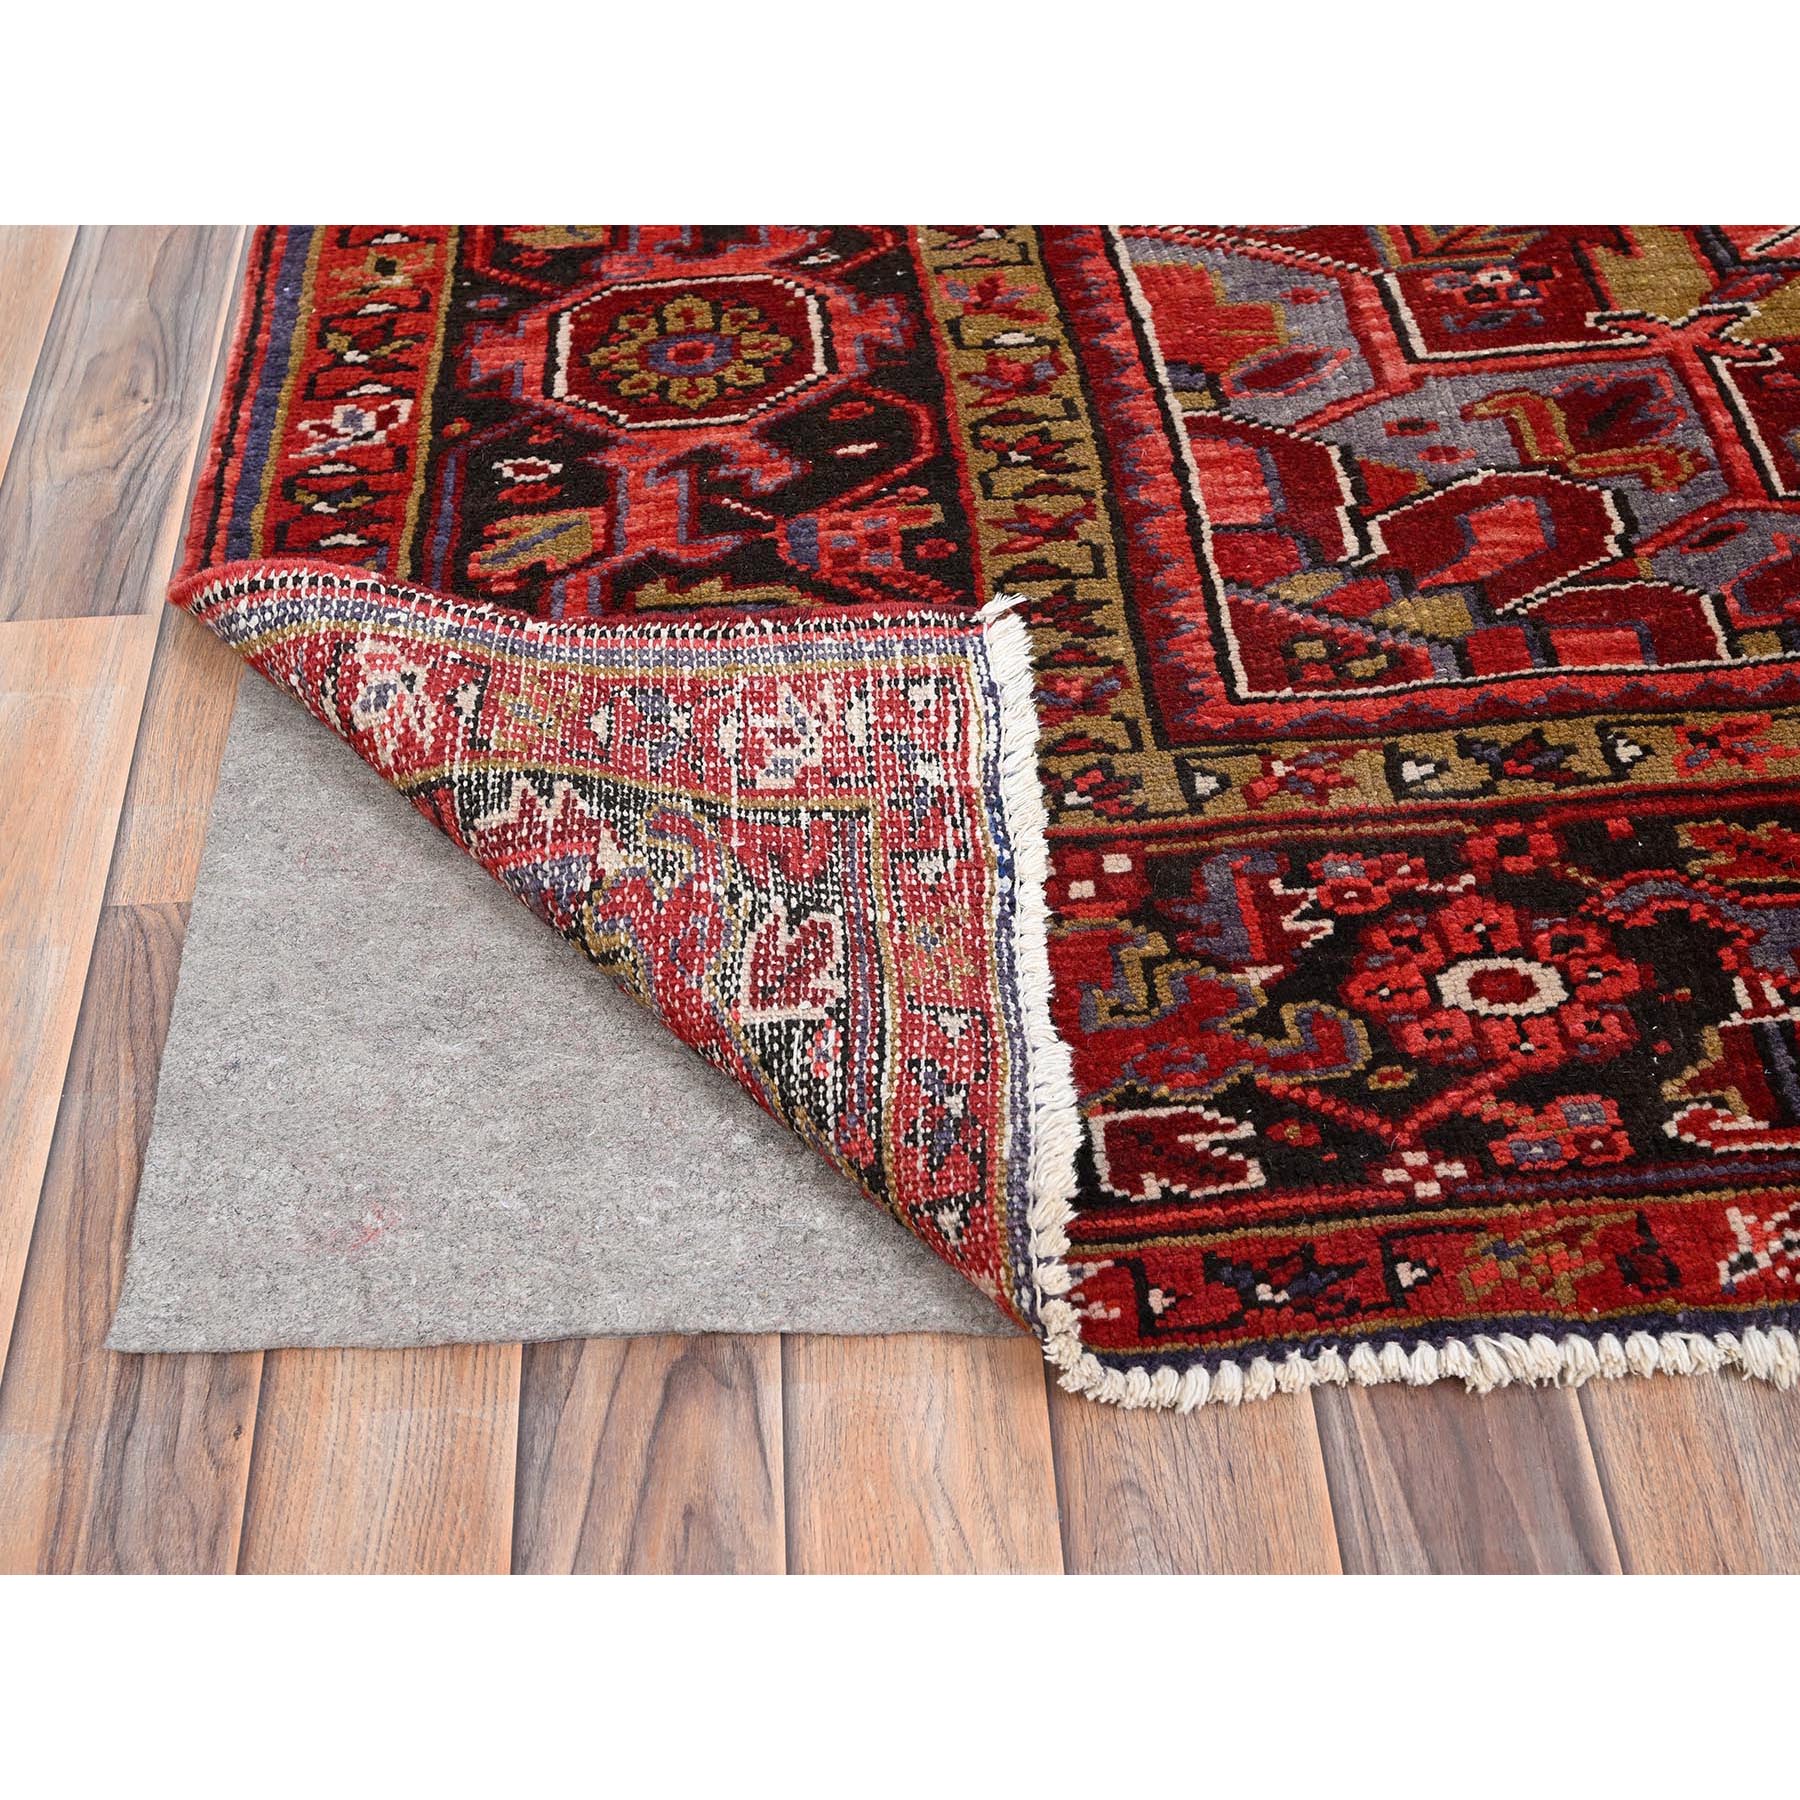 9'8"x13' Carmine Red, Rustic Look, Worn Wool, Hand Woven, Vintage Persian Heriz with Geometric Pattern, Good Condition, Oriental Rug 